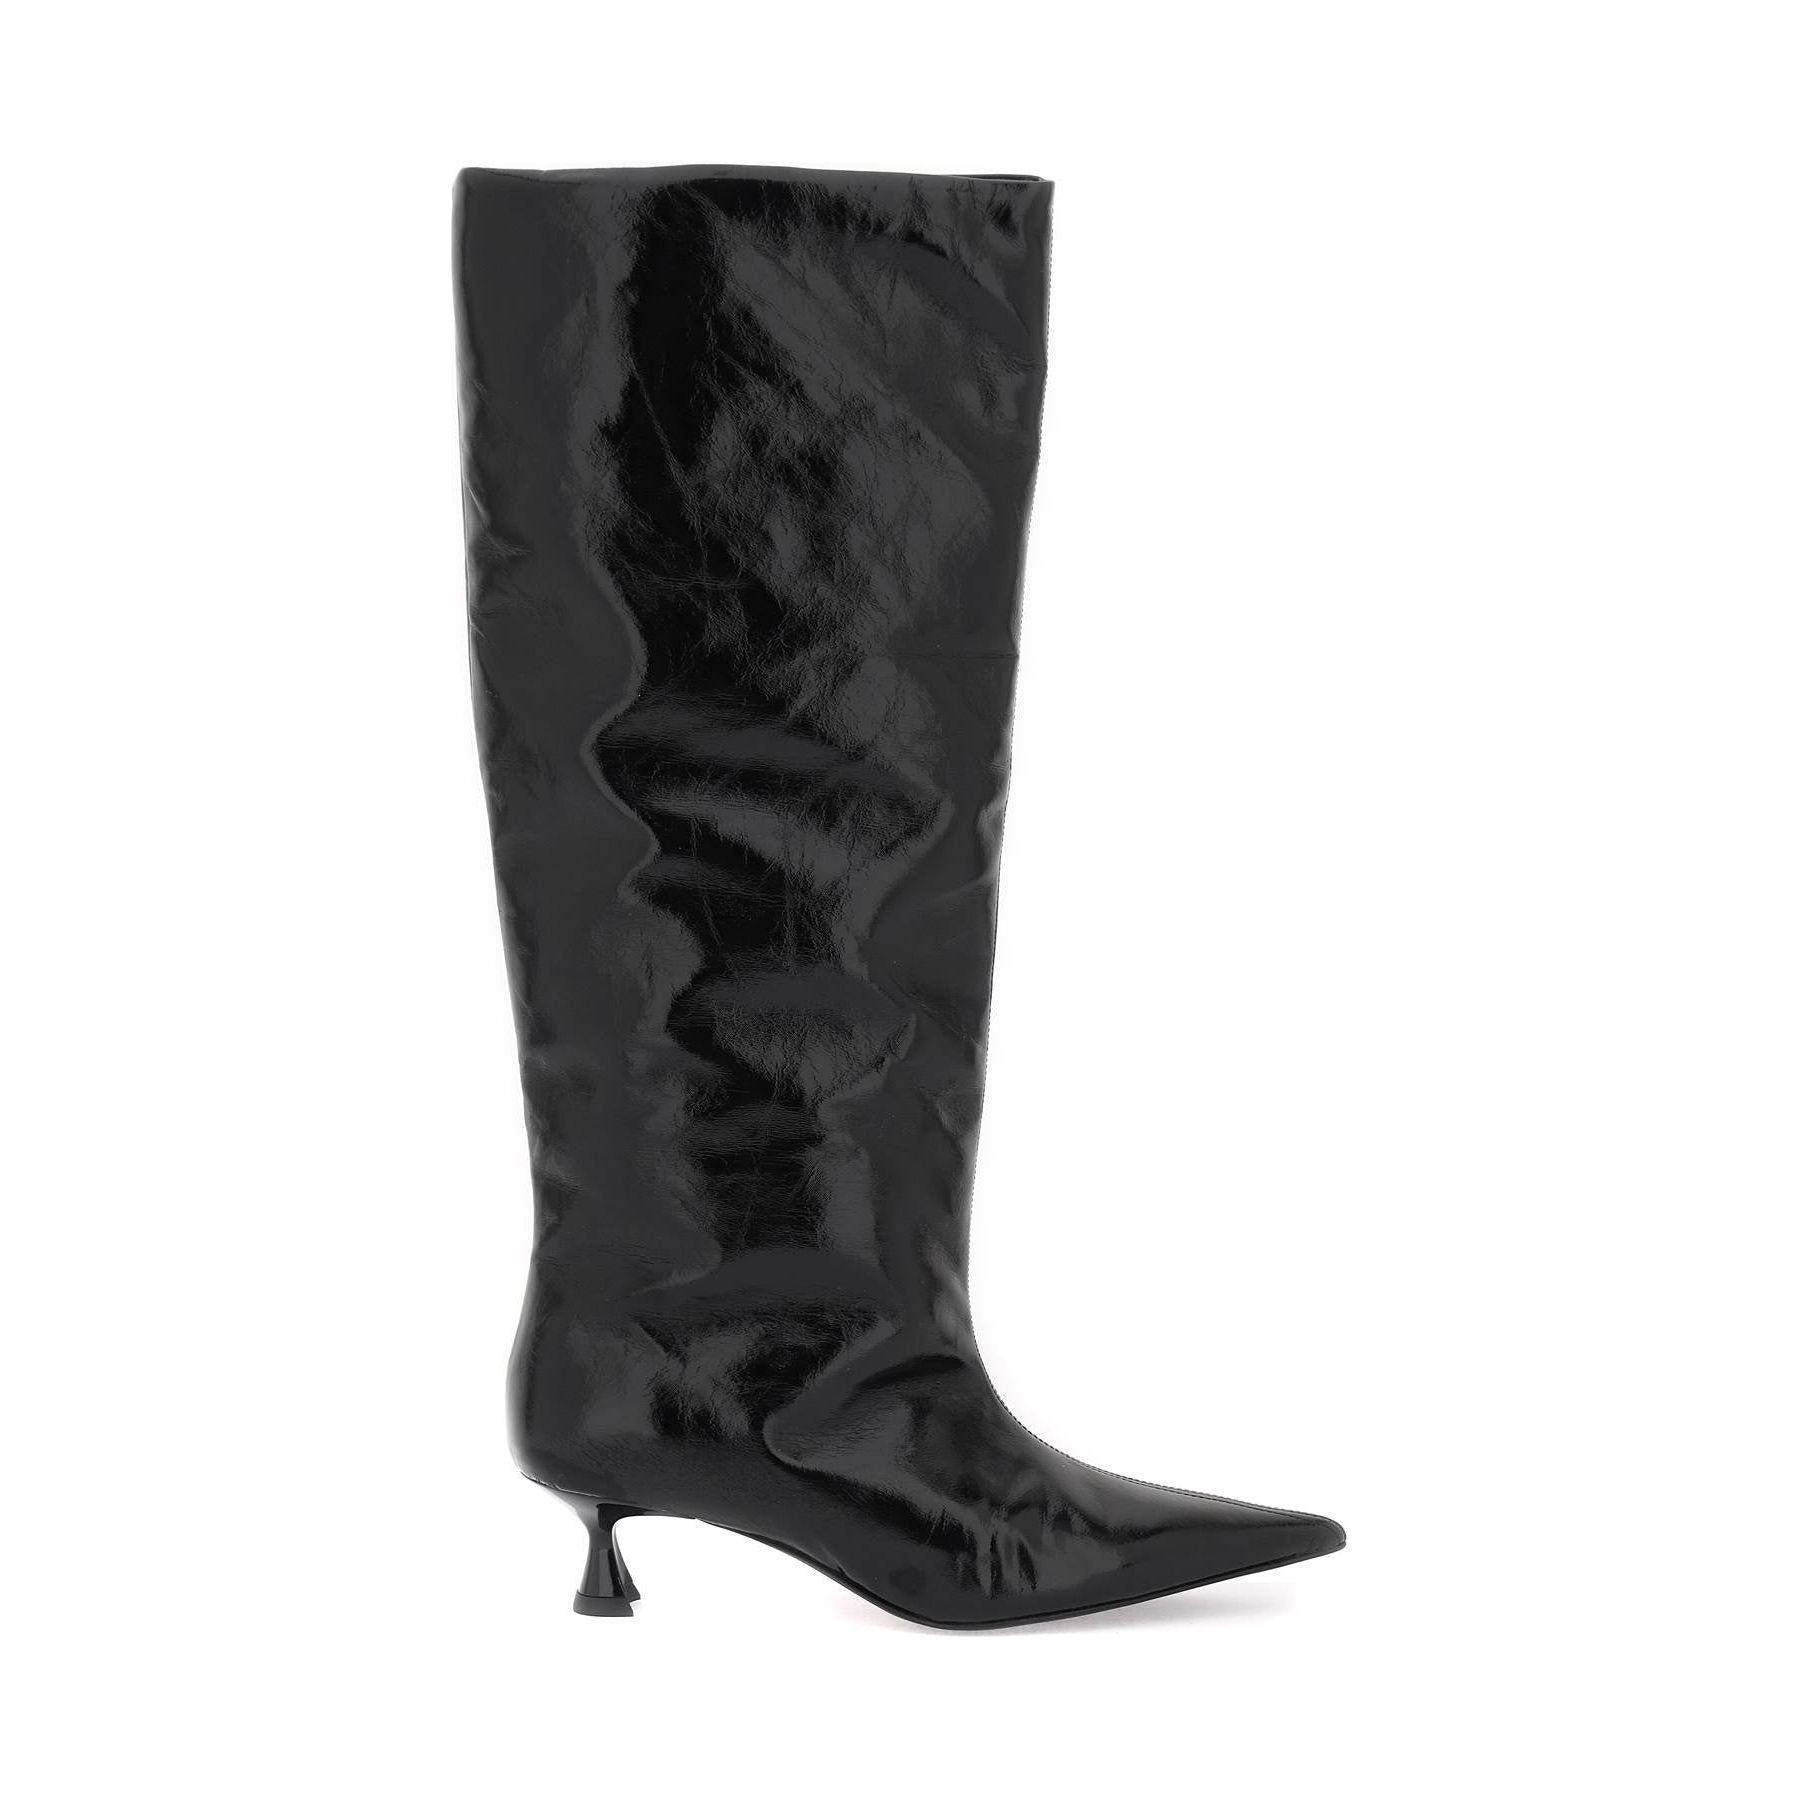 Soft Slouchy Knee-High Shaft Boots